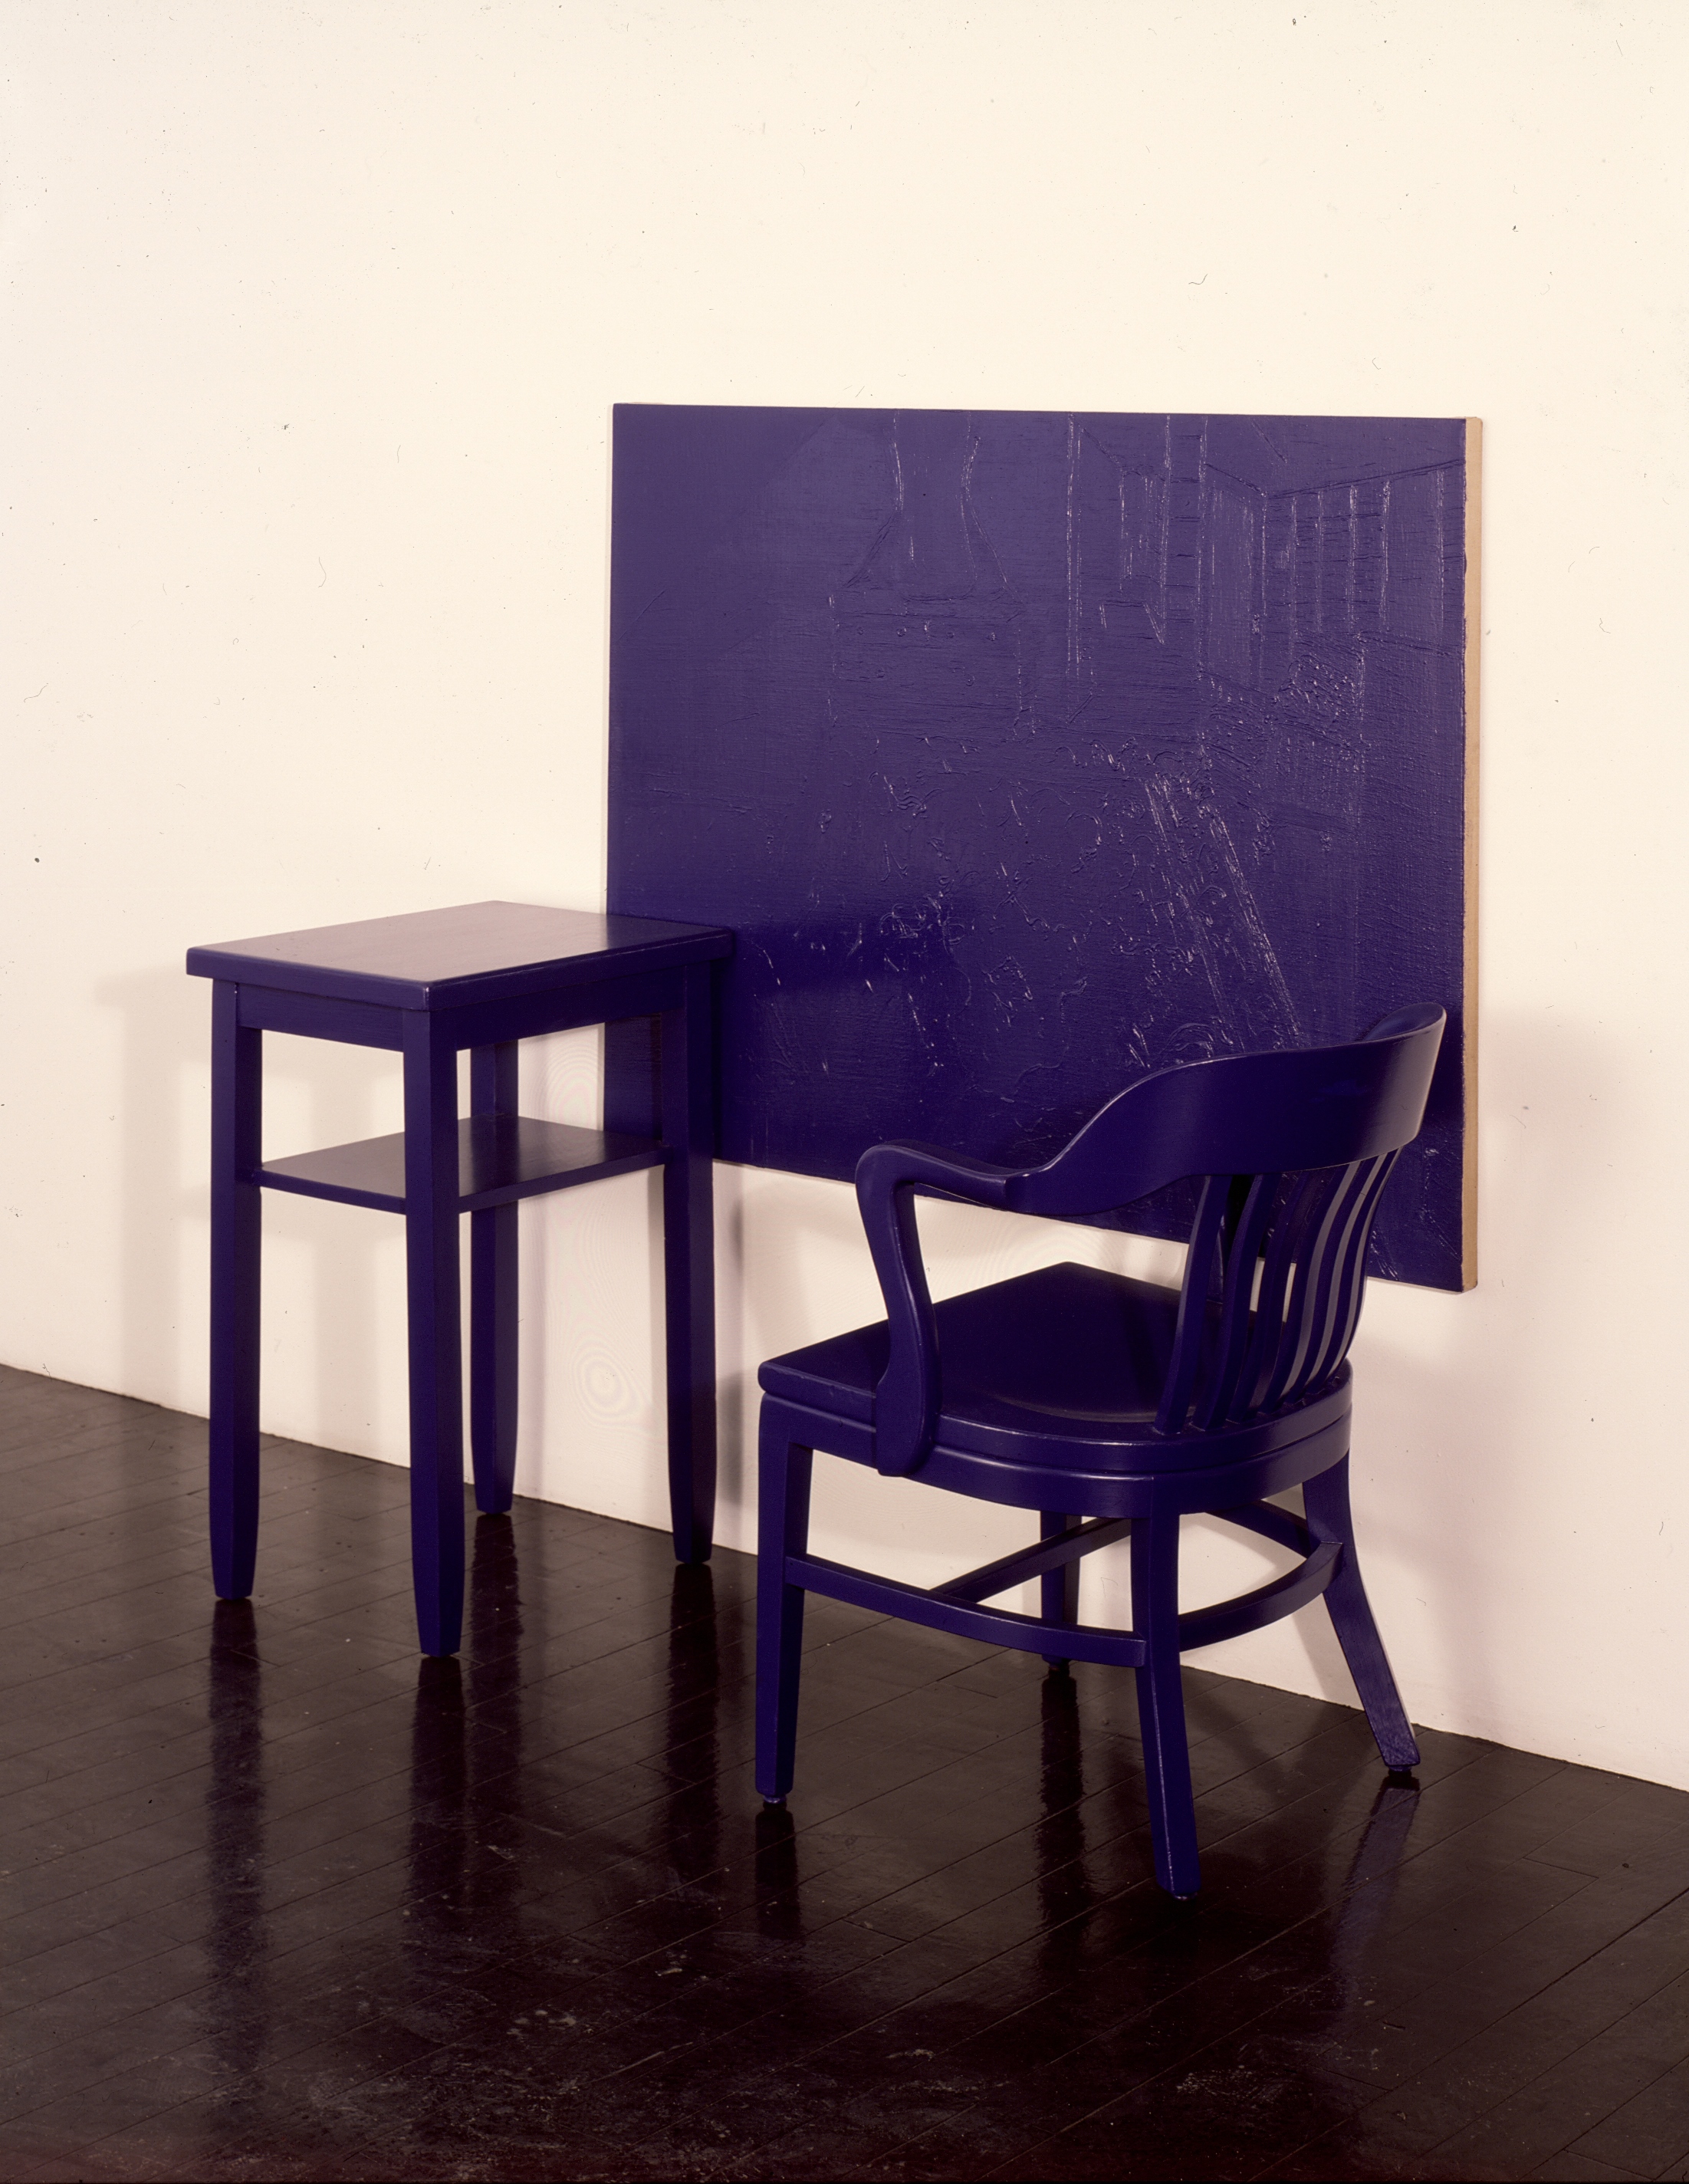 Cobalt Blue, Hue Deep - Stable; table, chair, oil on canvas, oil painting on wall with resin on glass overlay; dimensions variable